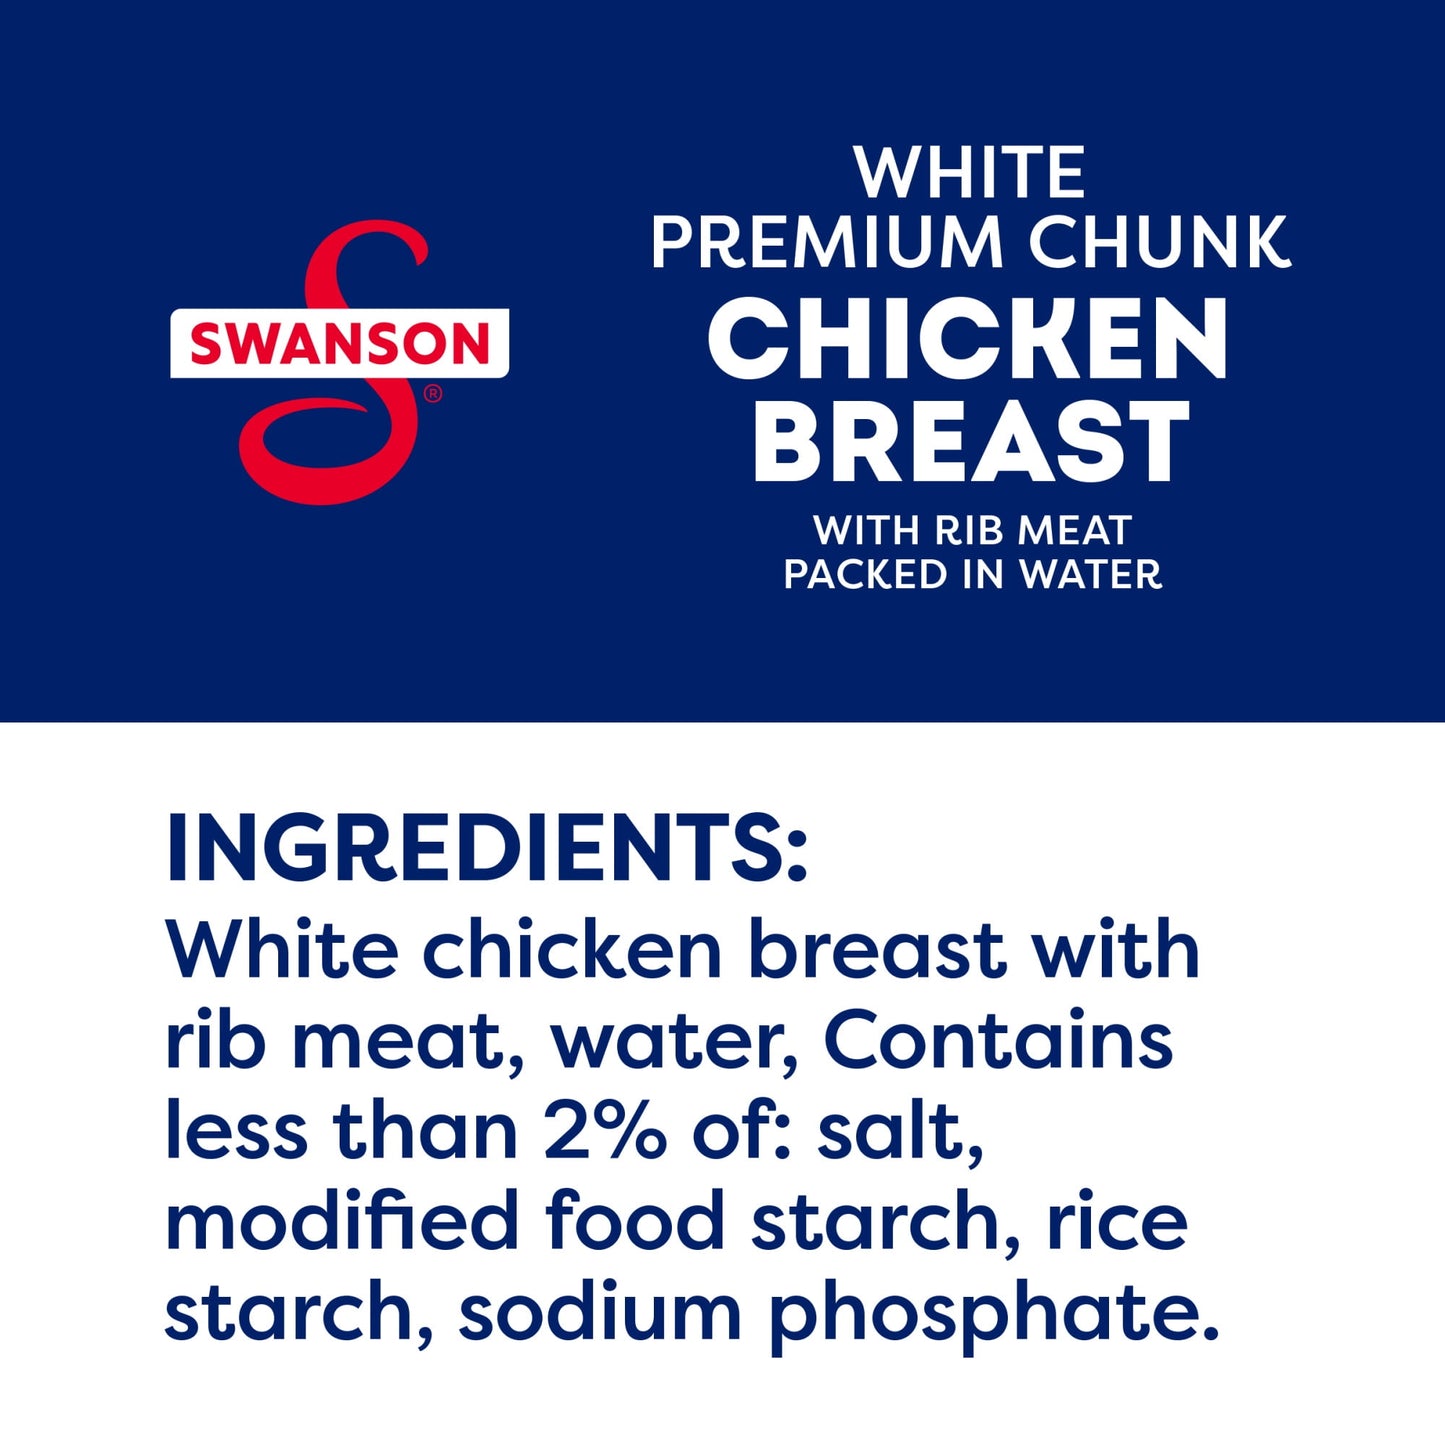 Swanson White Premium Chunk Canned Chicken Breast in Water, Fully Cooked Chicken, 4.5 oz Can